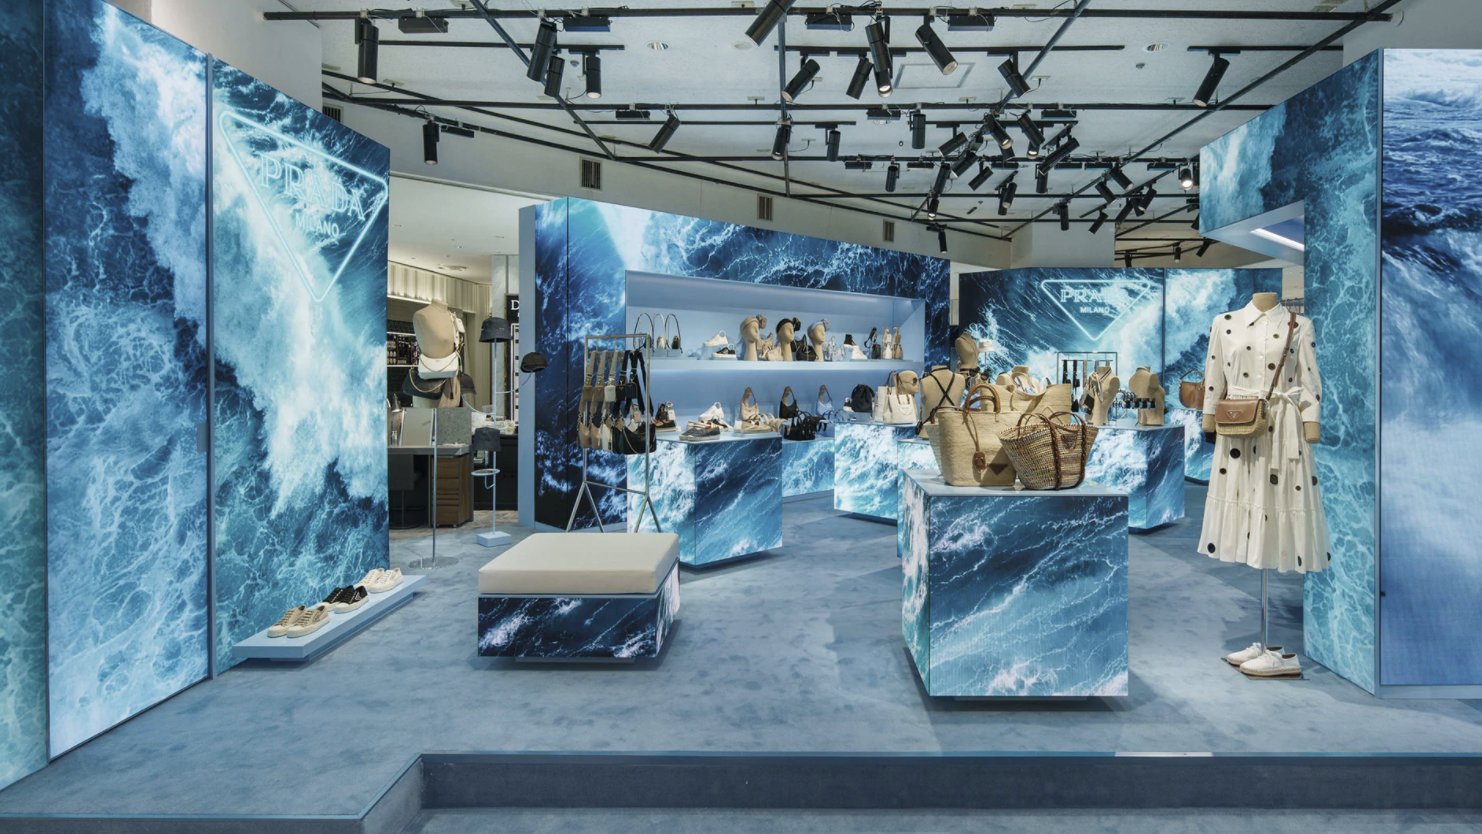 Prada Enchanted: new pop-up stores in Tokyo and London